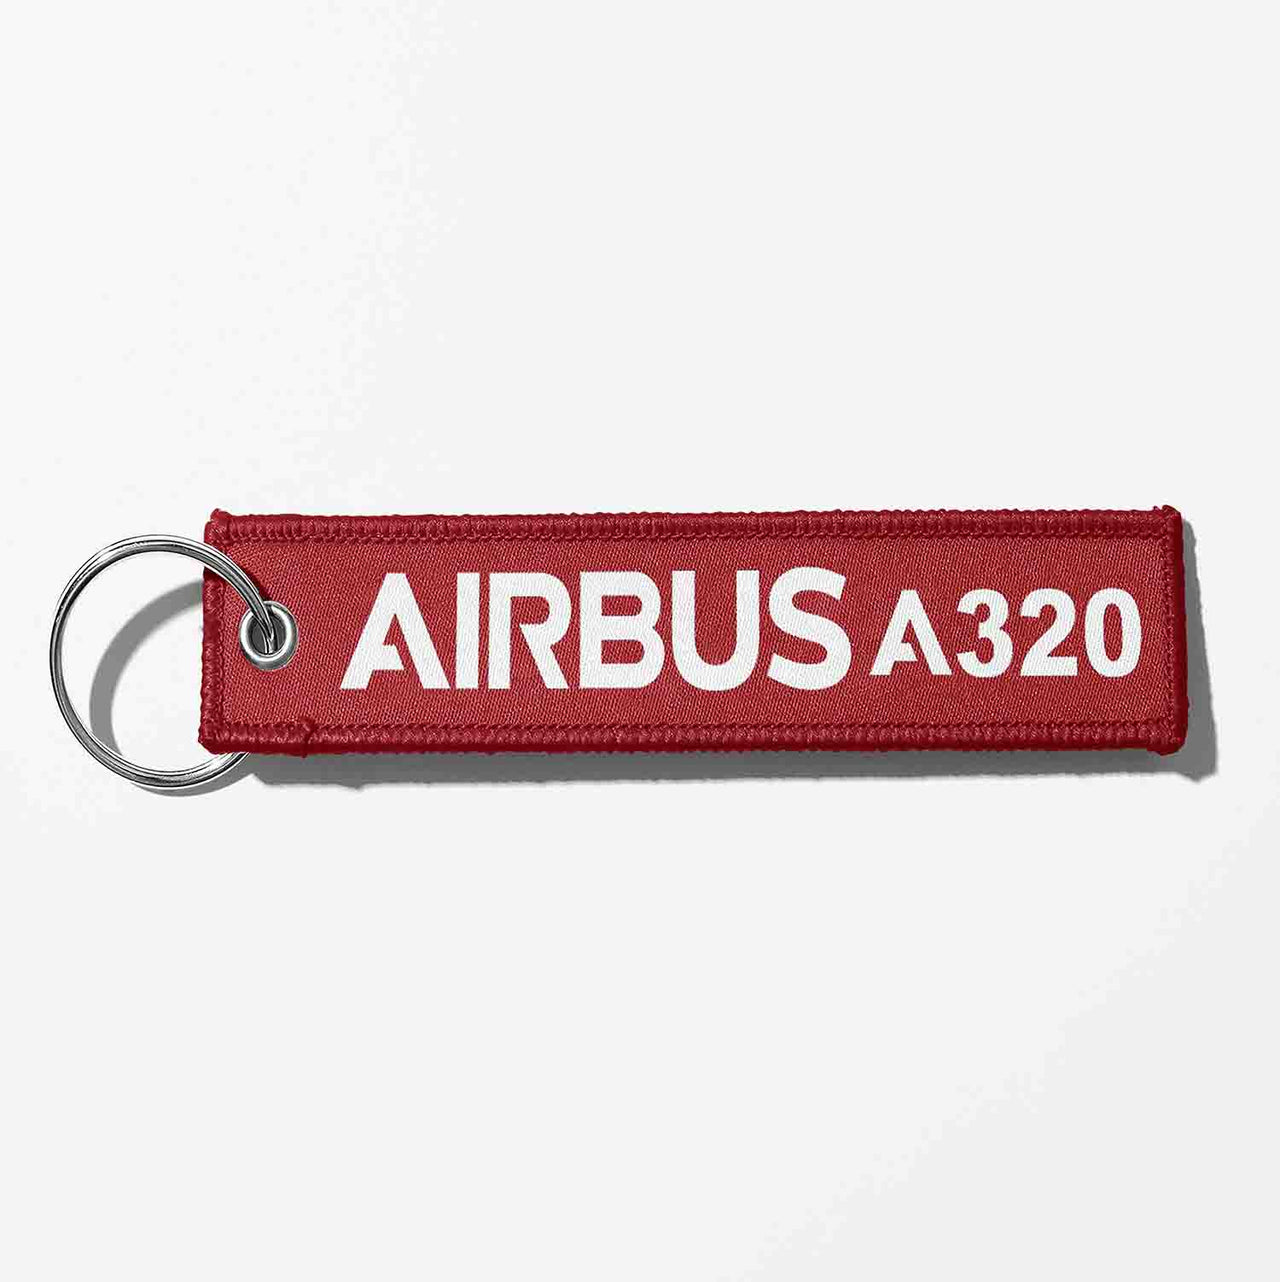 Airbus A320 & Text Designed Key Chains